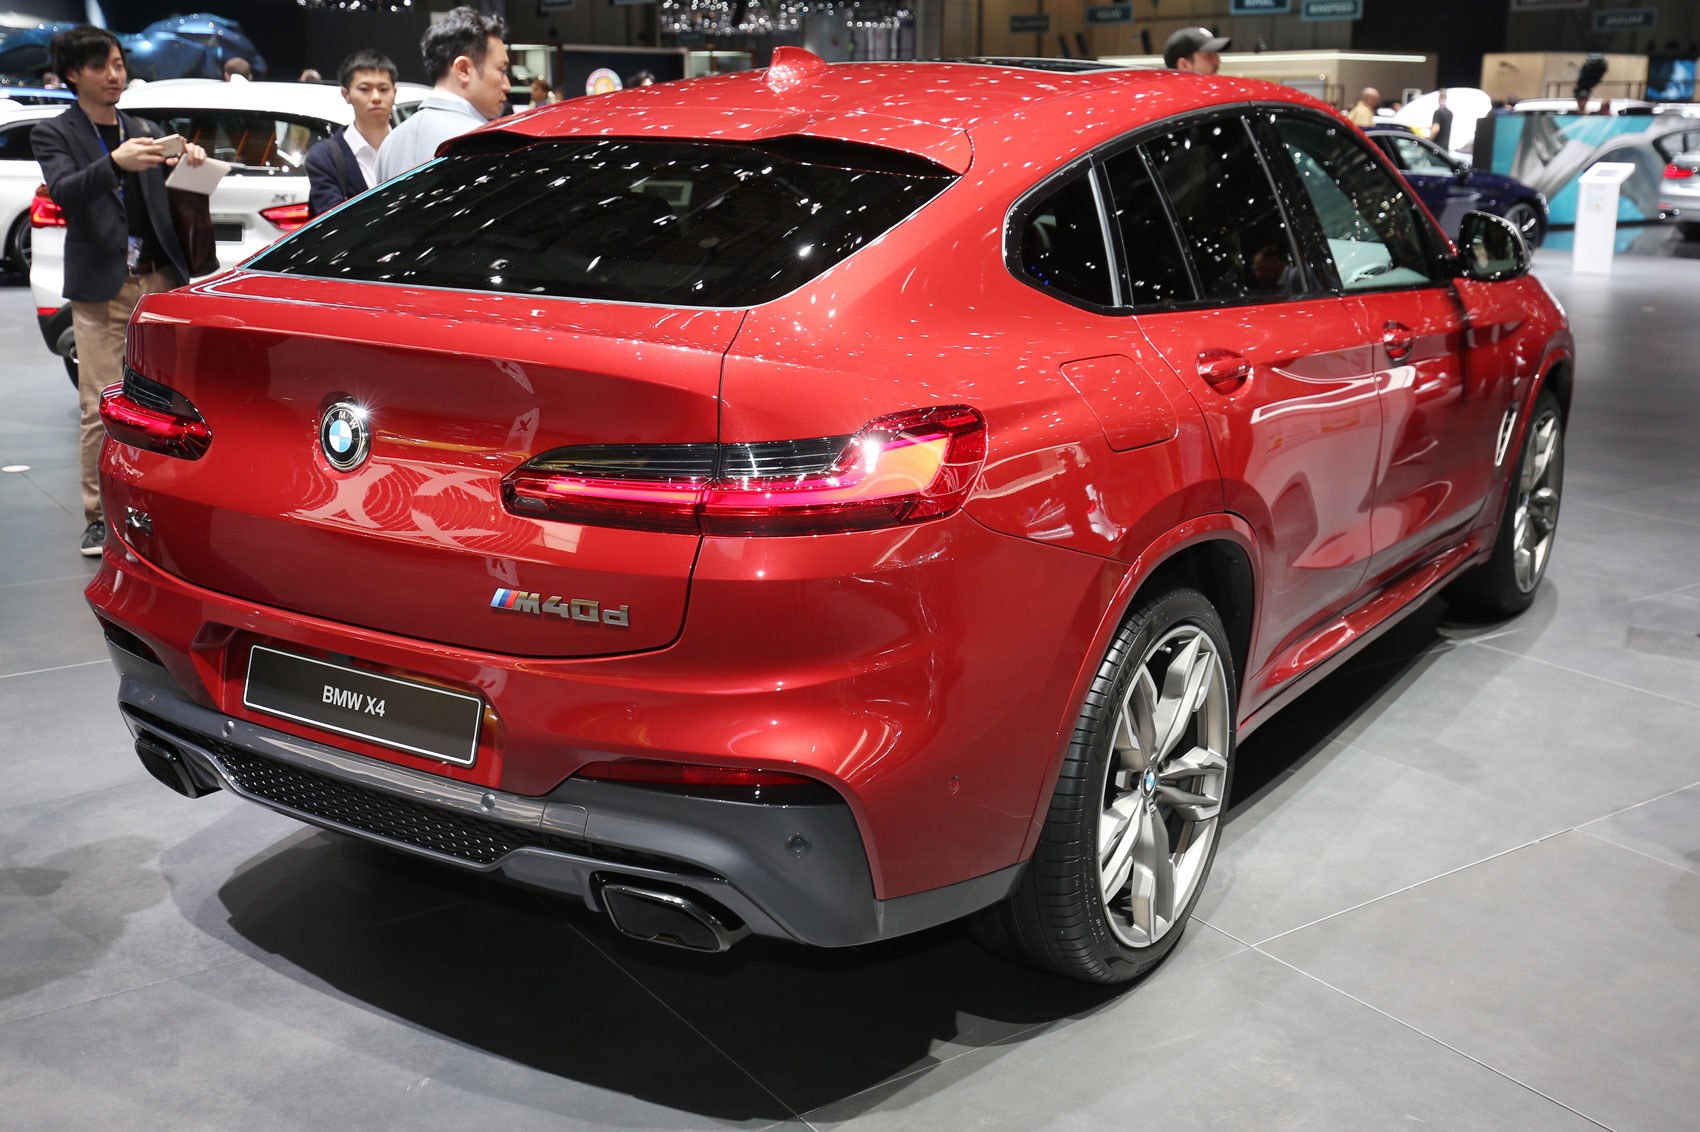 Generation X Hot Bmw X4 M40i Coming To New York Show Car